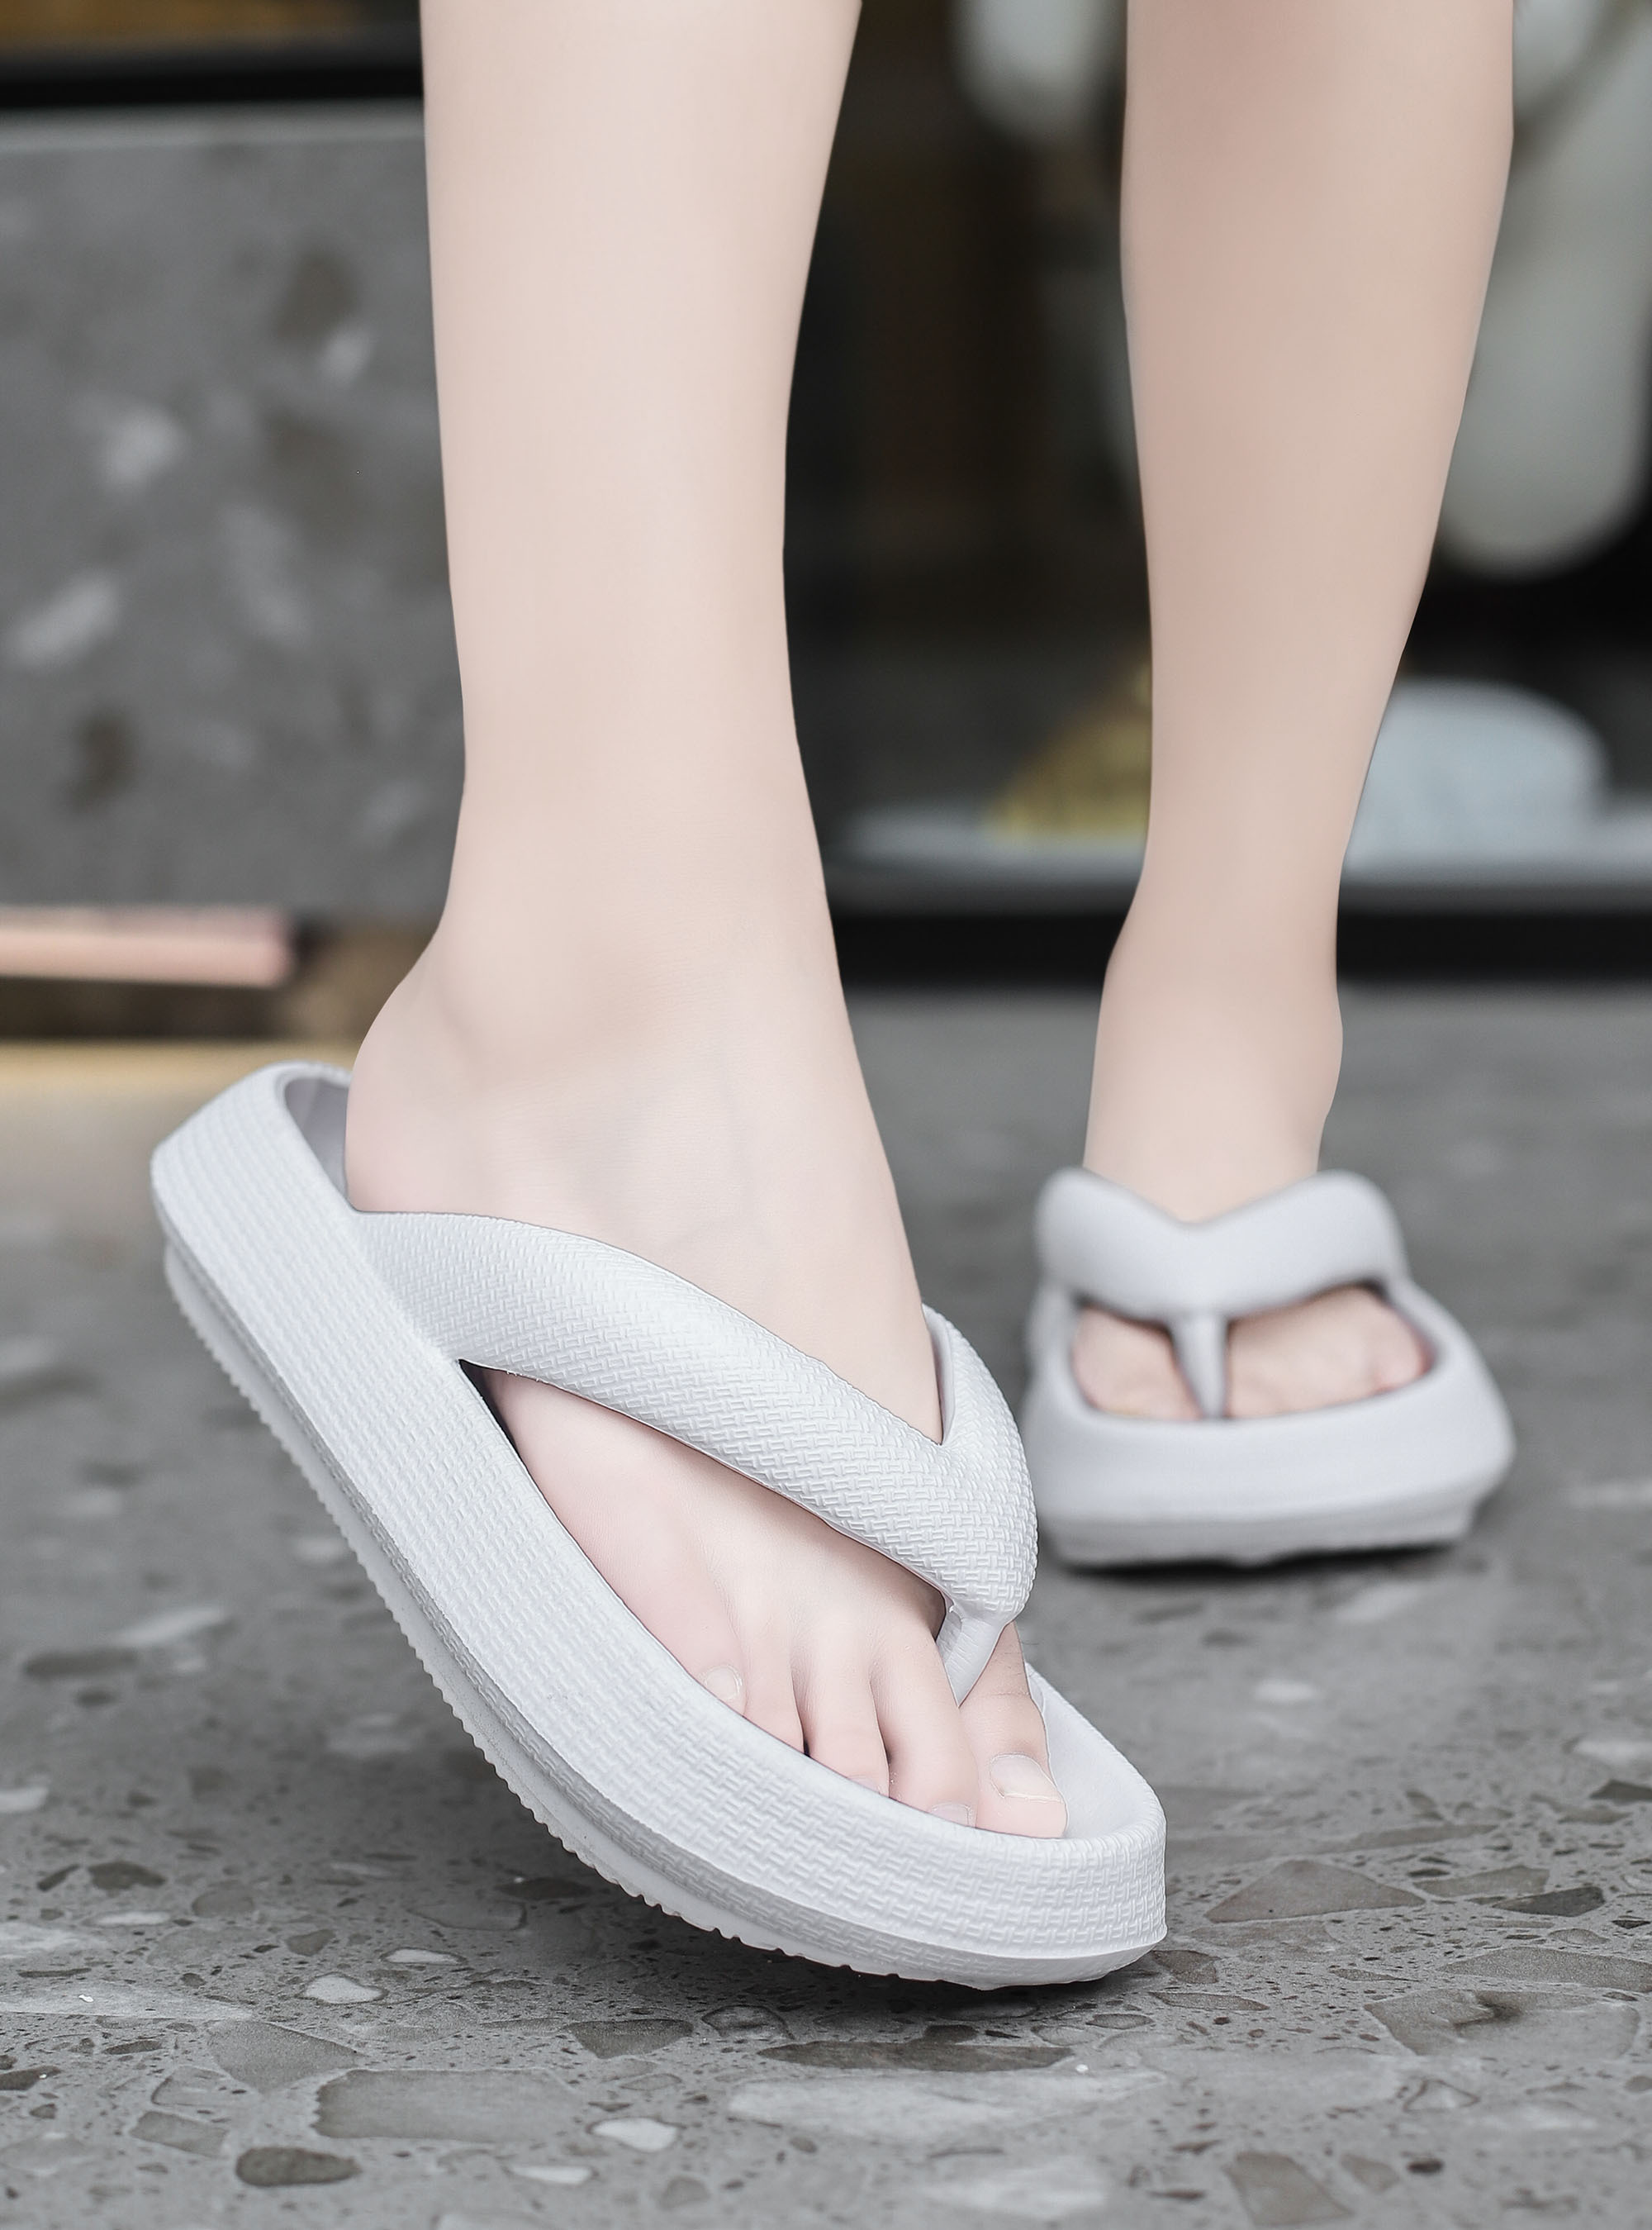 Flip Flop Slippers，Ladies Slippers, Fashion All-Match Non-Slip Shoes for  Summer, Thick-Soled Sandals-White_38 price in UAE,  UAE